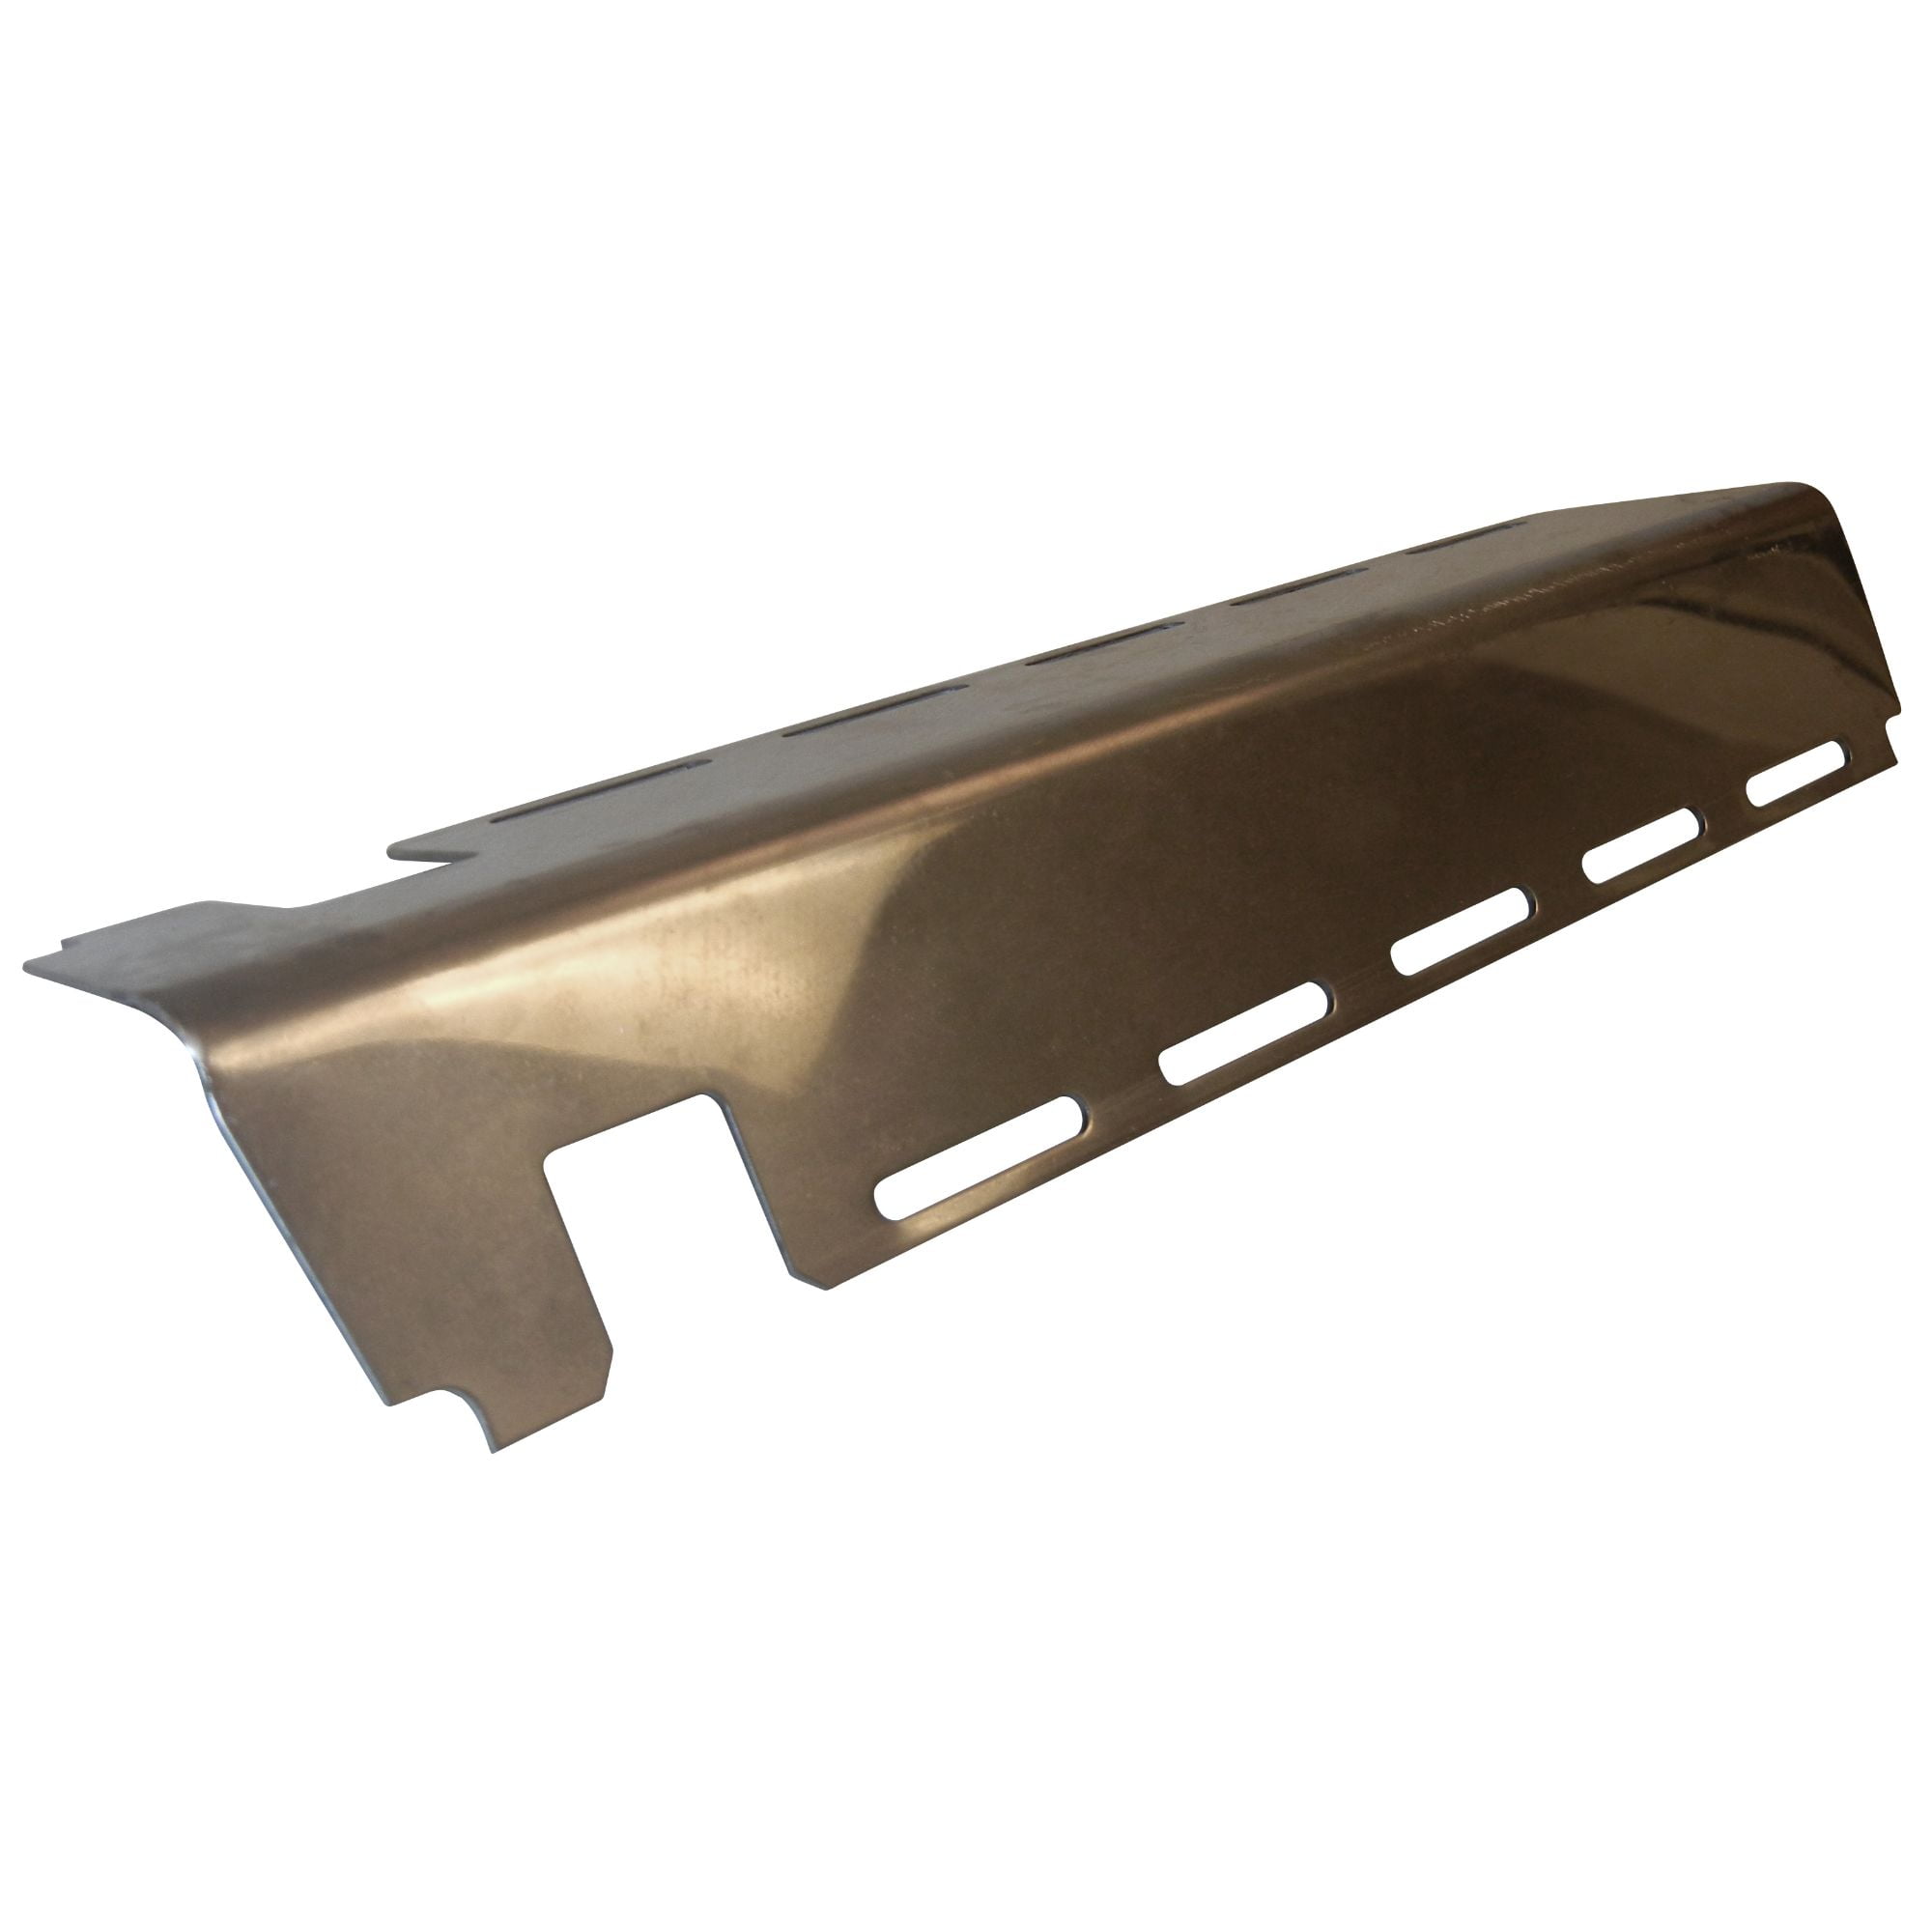 10.75" Stainless Heat Plate for Huntington Gas Grills - Walmart.com